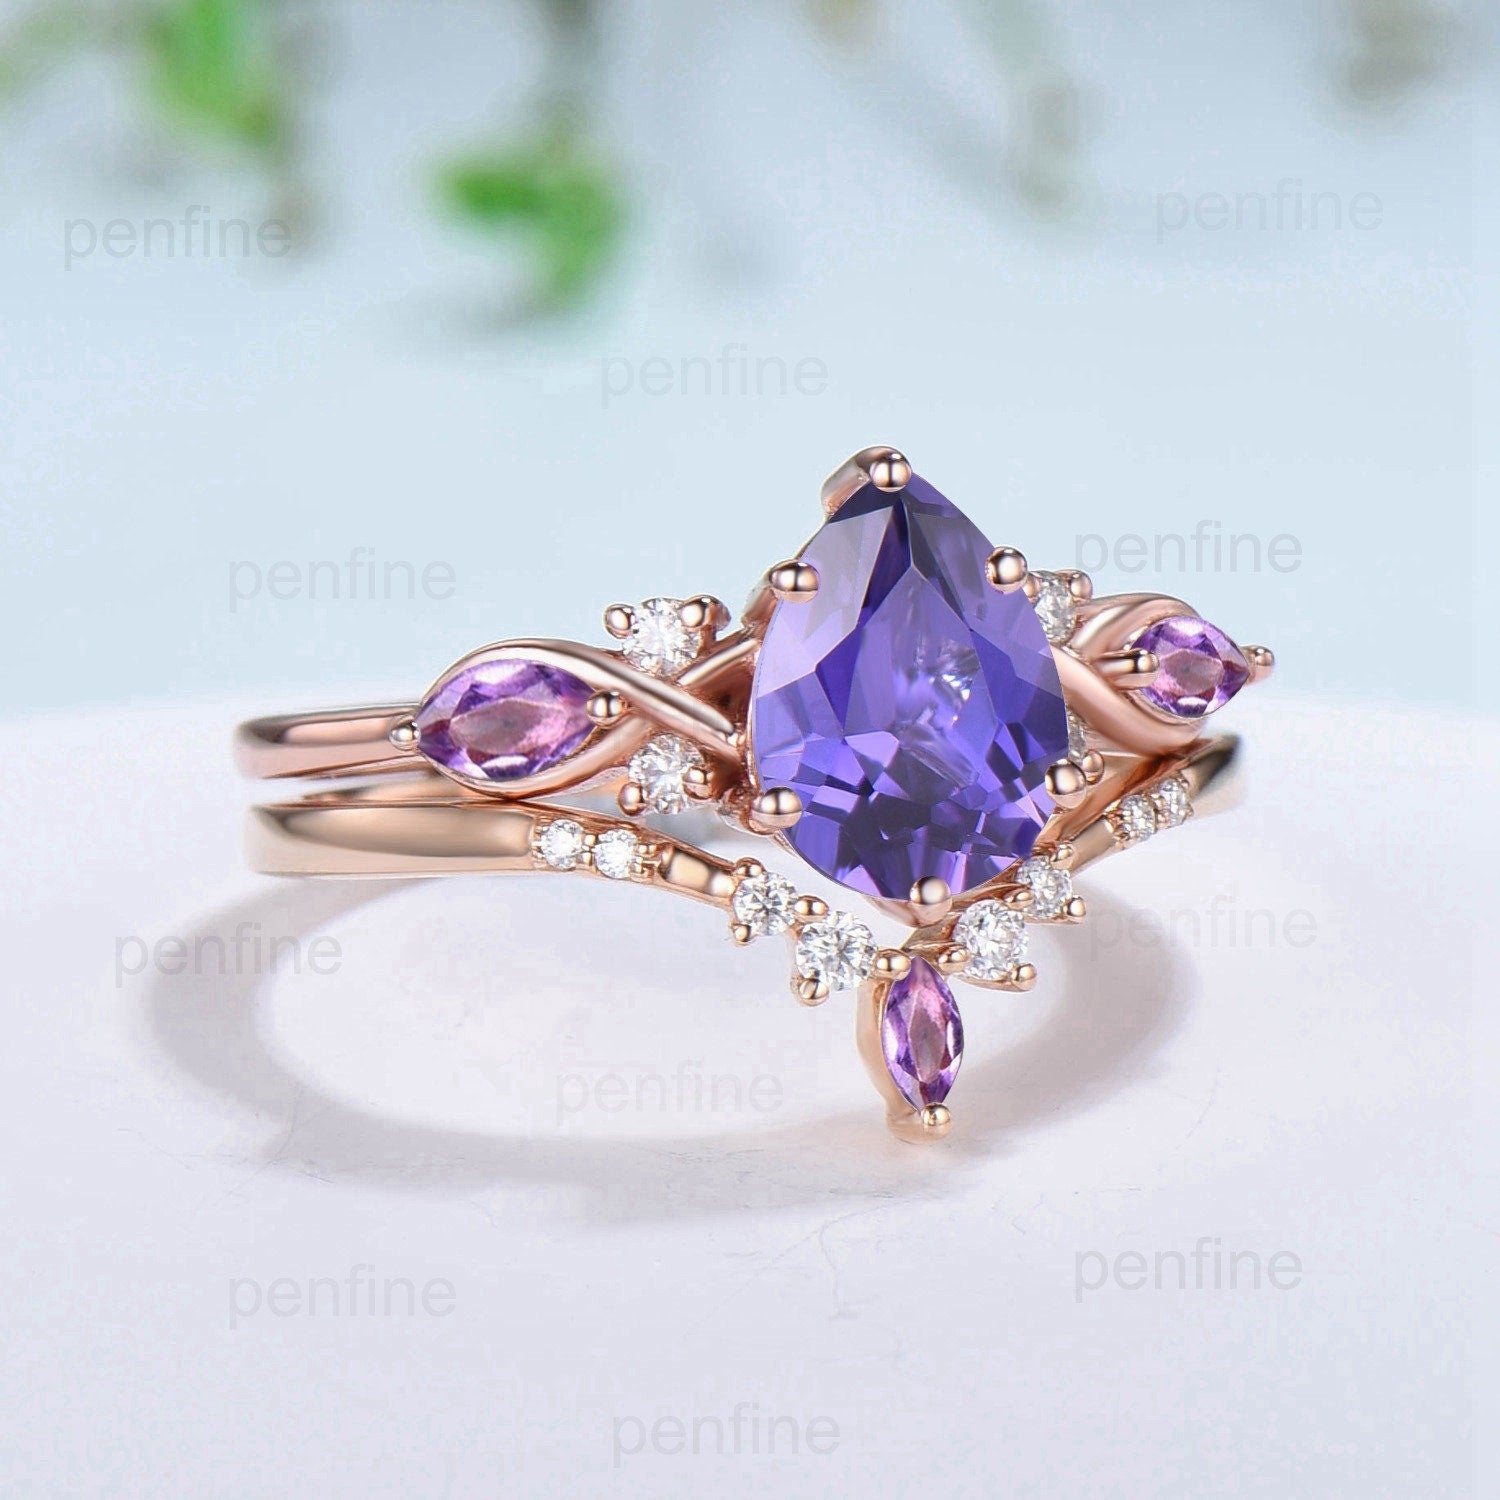 Leaf and Branch 1 carat Pear shaped man made Alexandrite and diamond p –  Radhes.com